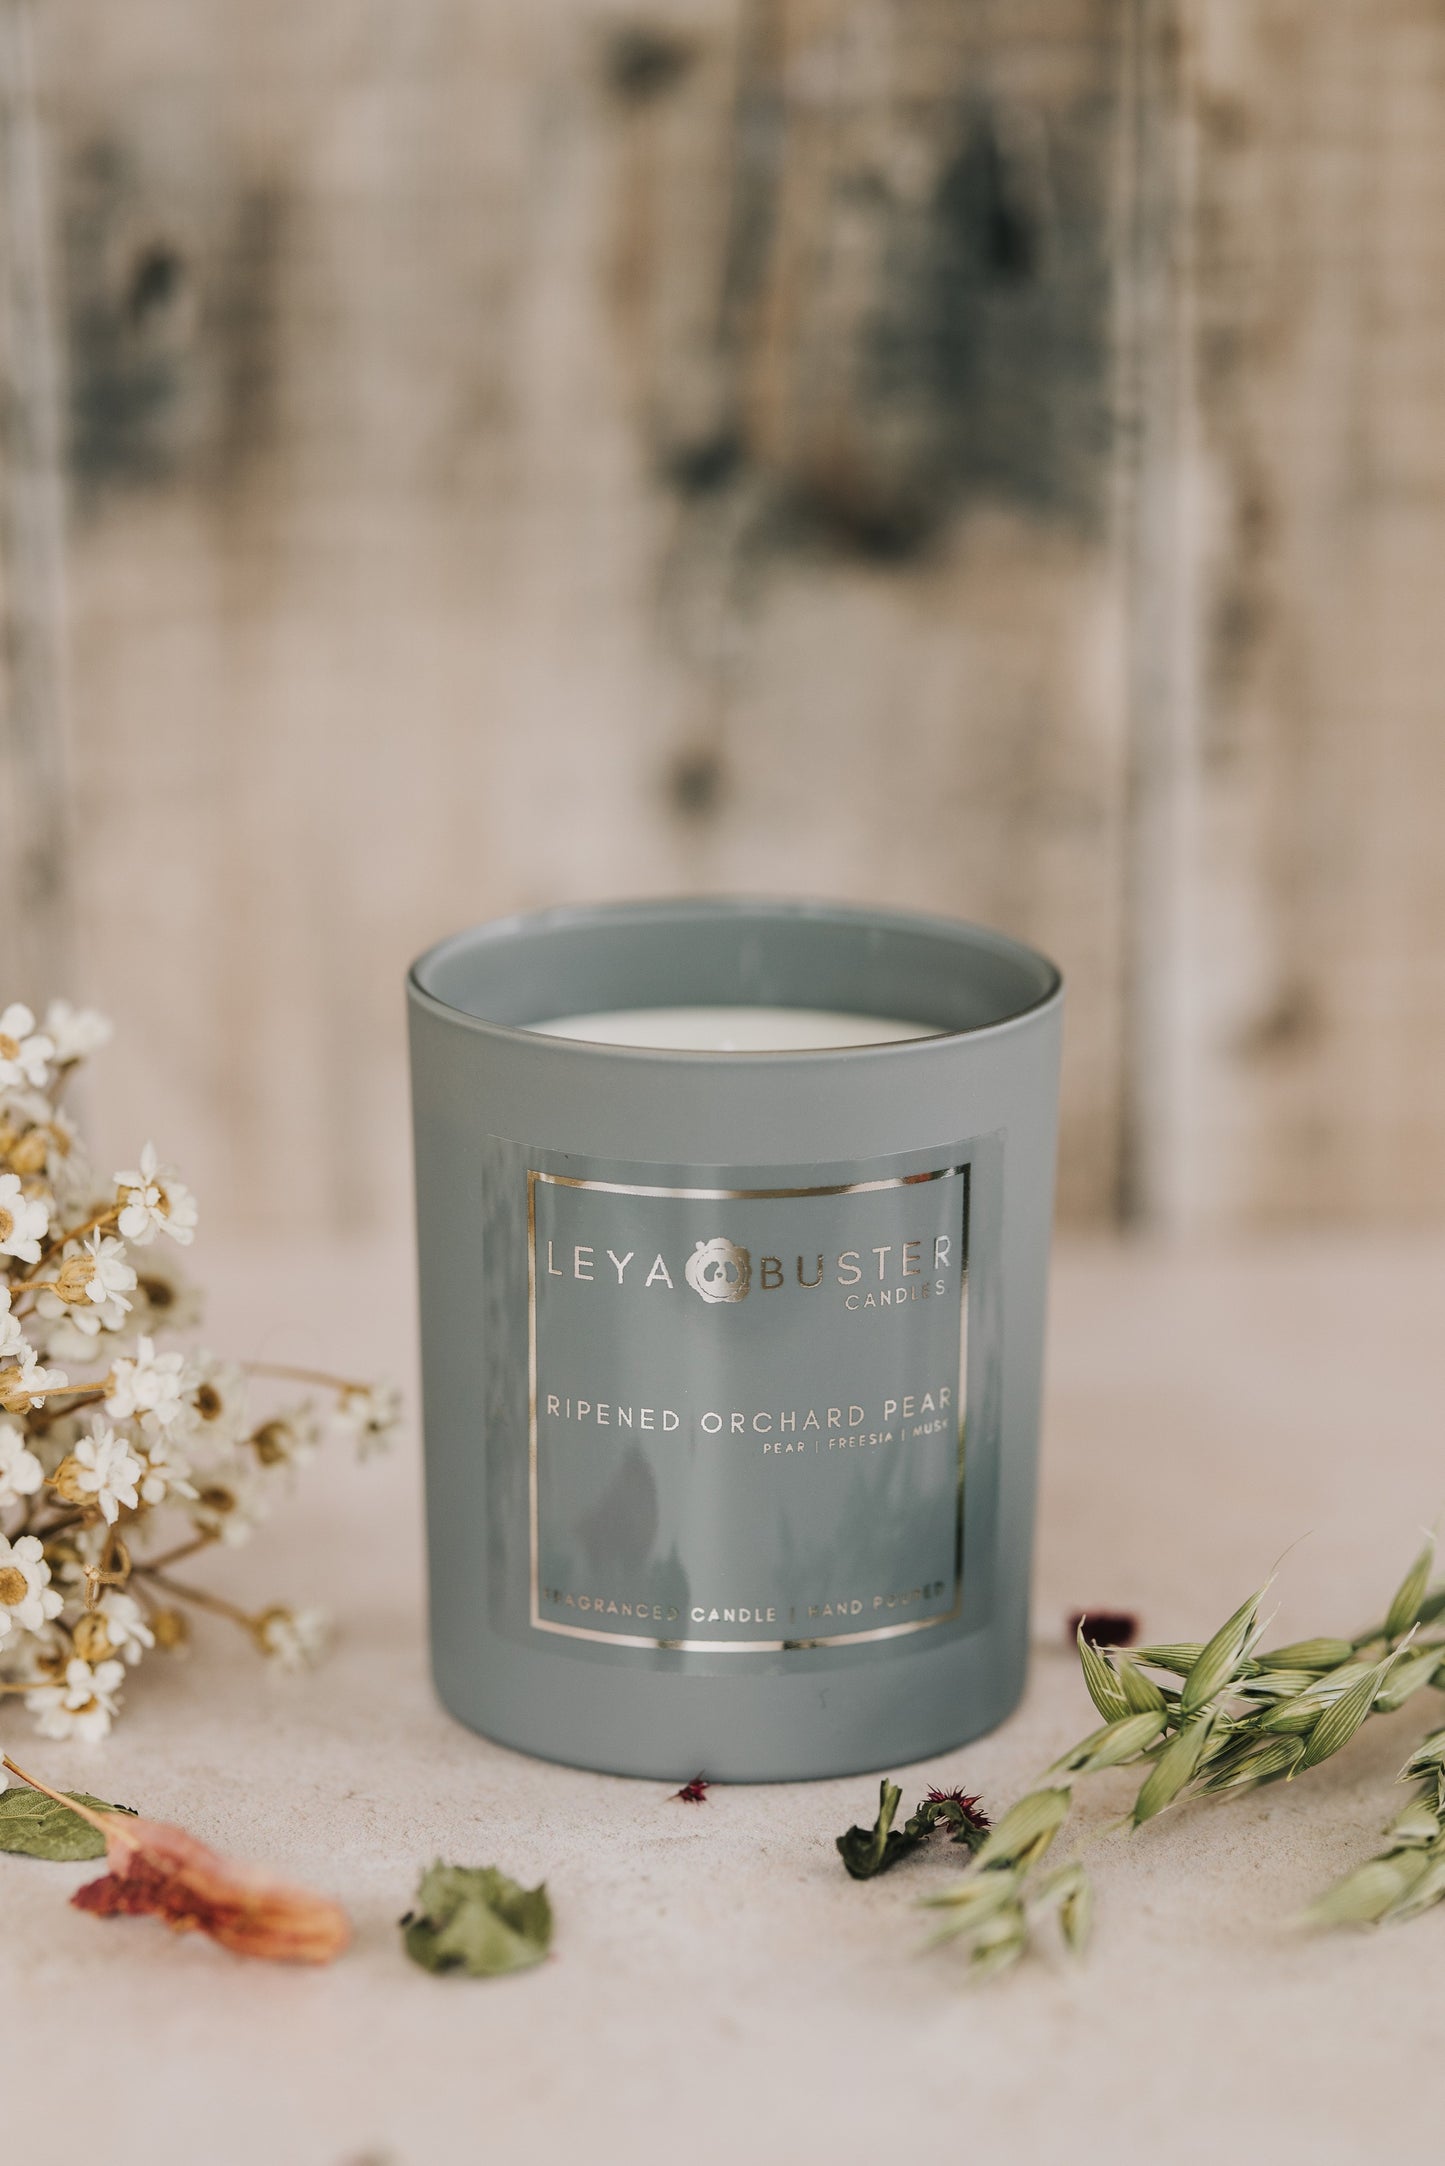 Ripened Orchard Pear - Candle